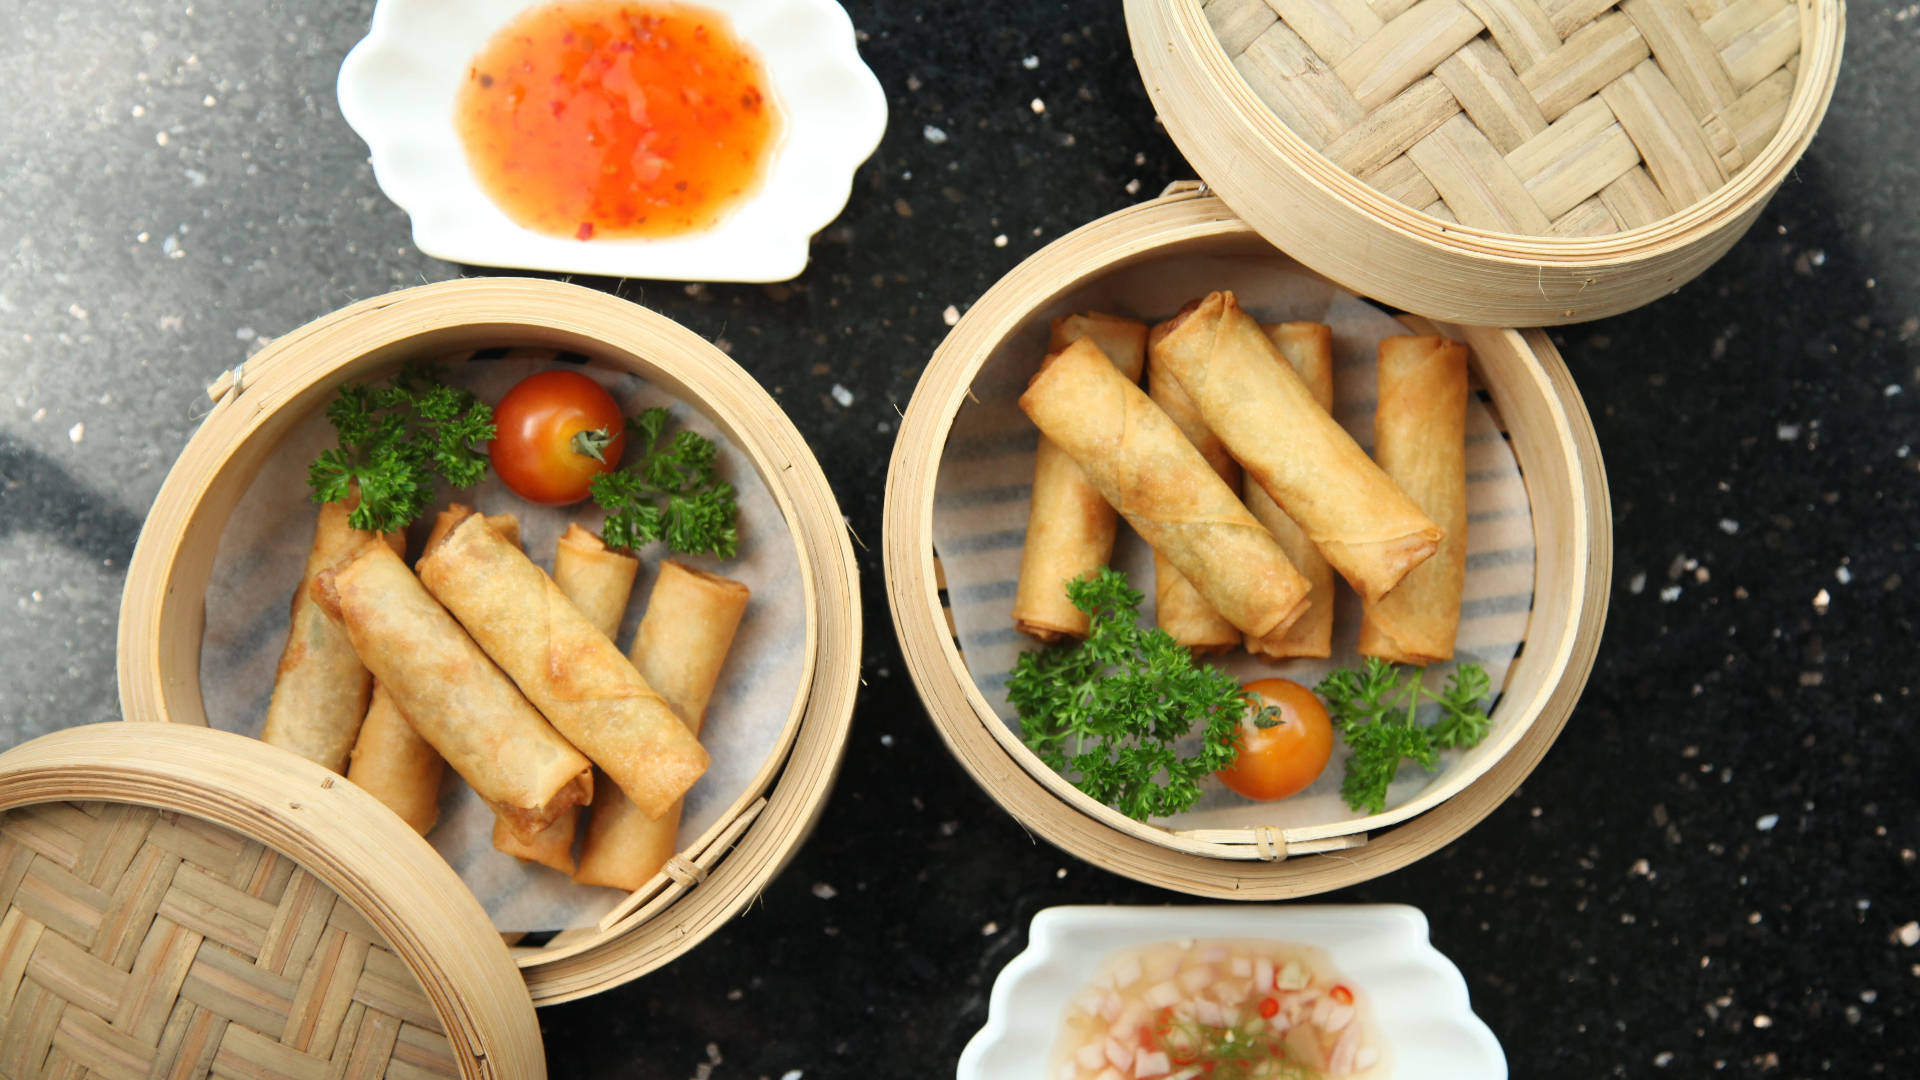 Delicious Steaming Basket Of Egg Rolls